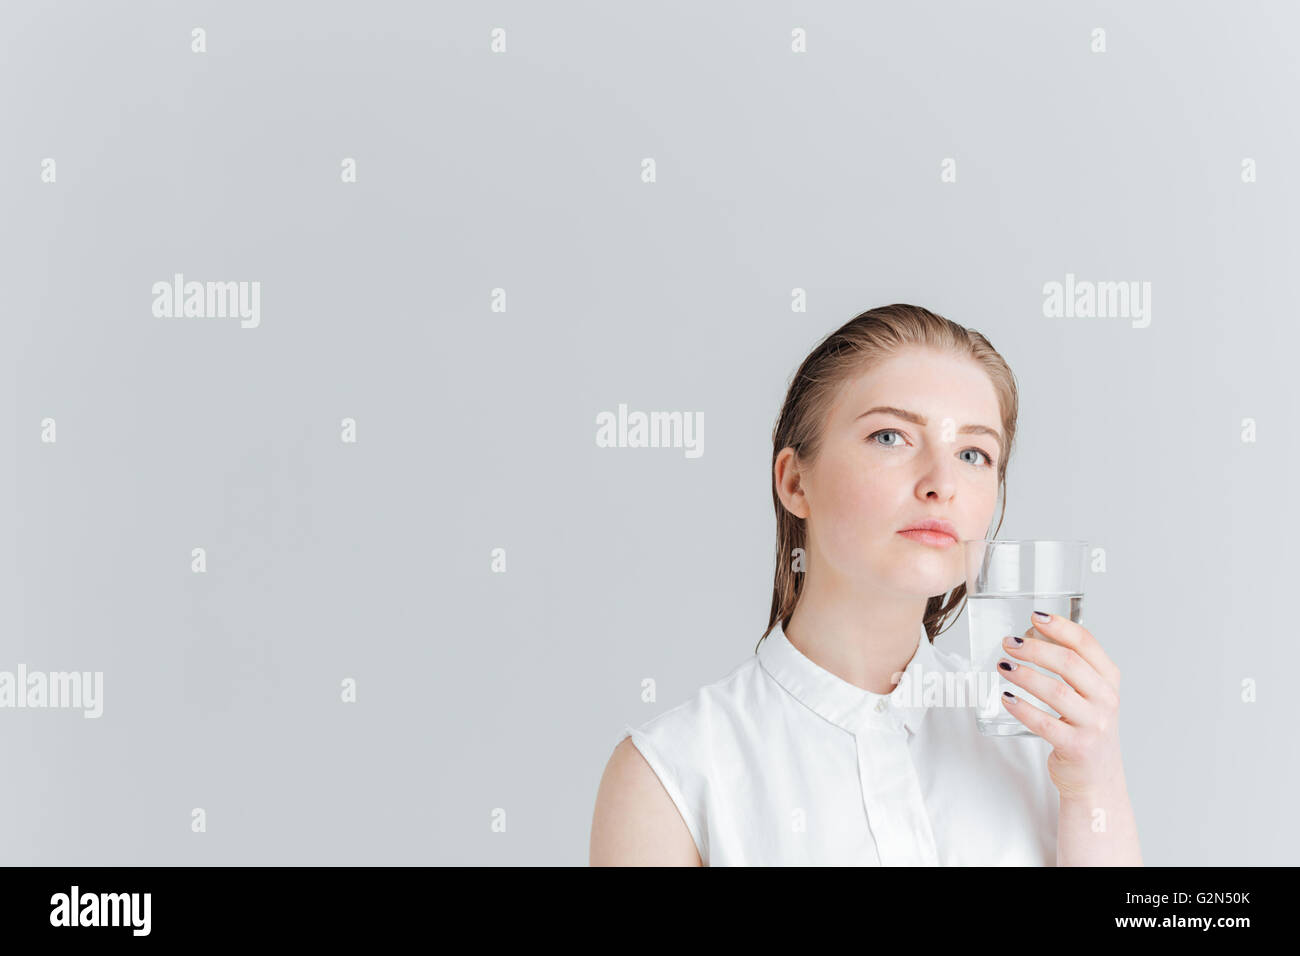 Portrait of a smiling woman holding glass of water isolé sur fond blanc Banque D'Images